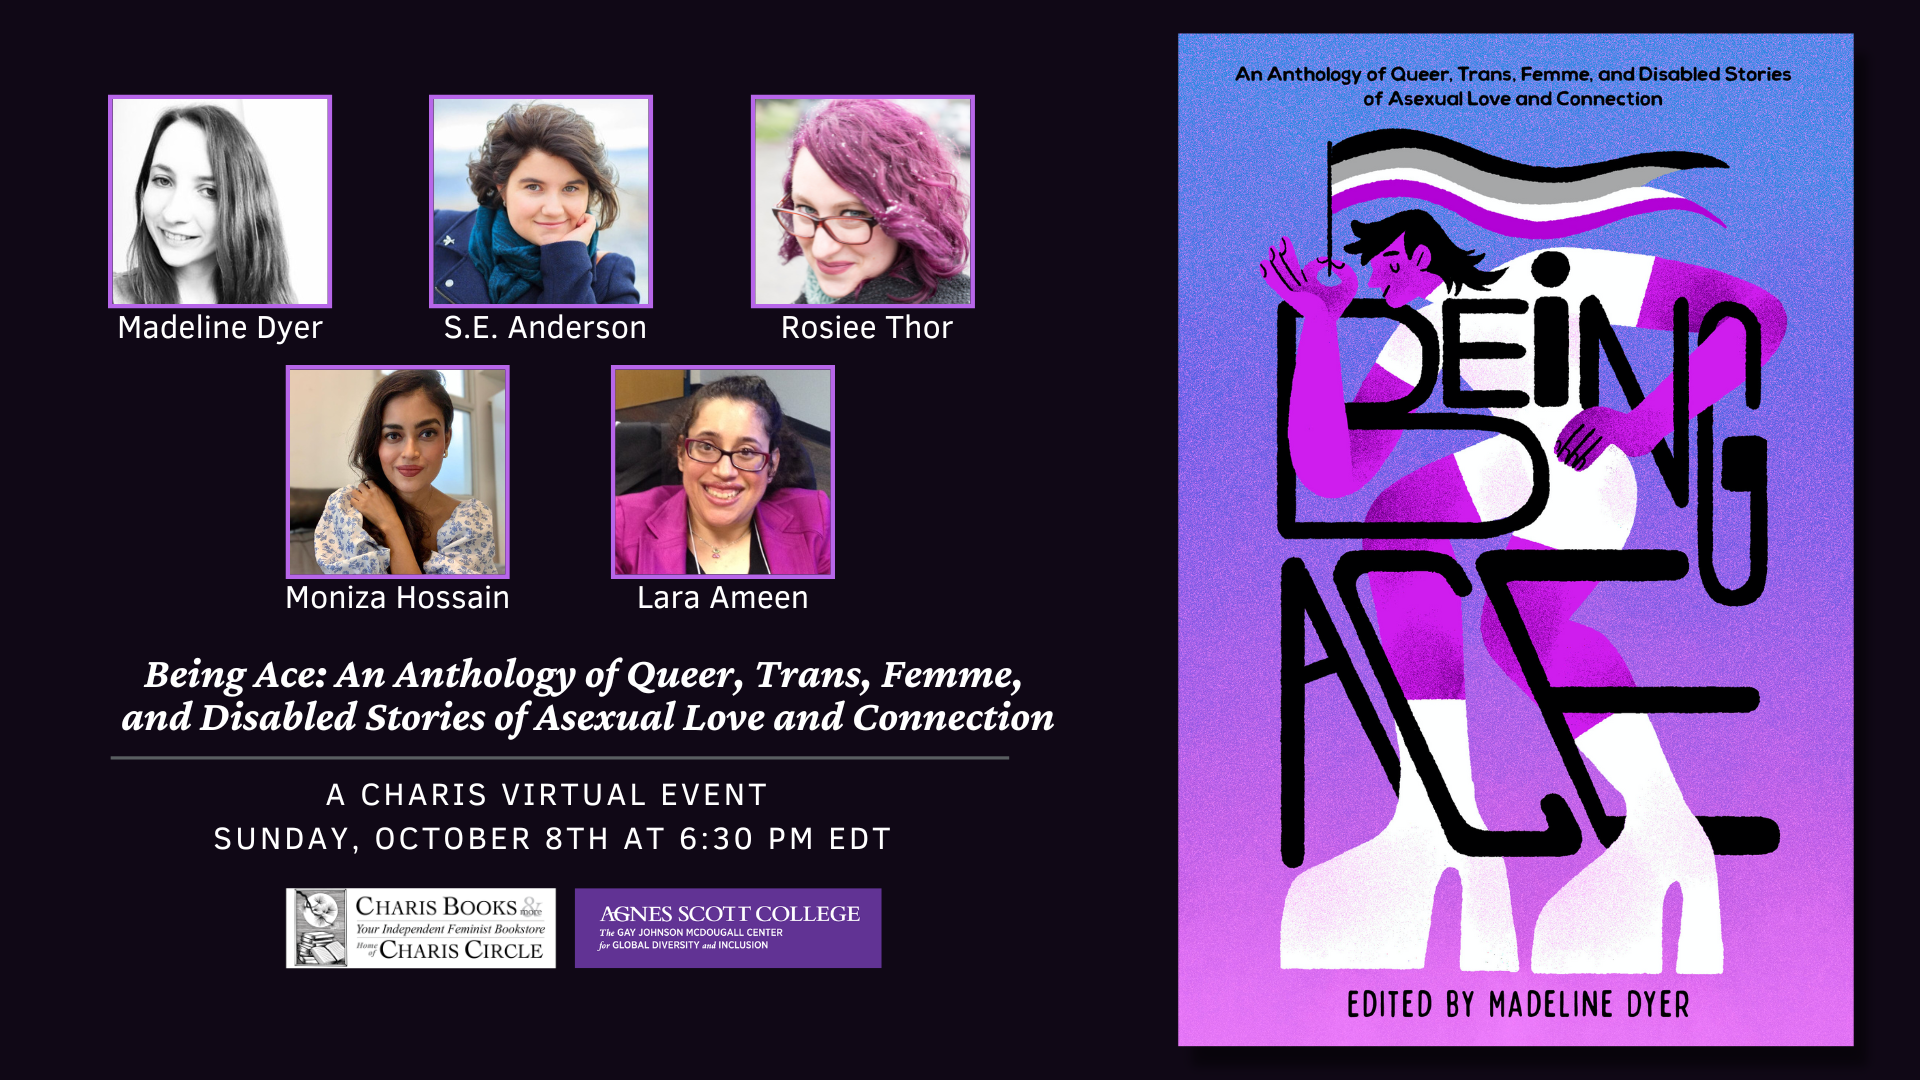 Being Ace: An Anthology of Queer, Trans, Femme, and Disabled Stories of Asexual Love and Connection event cover photo